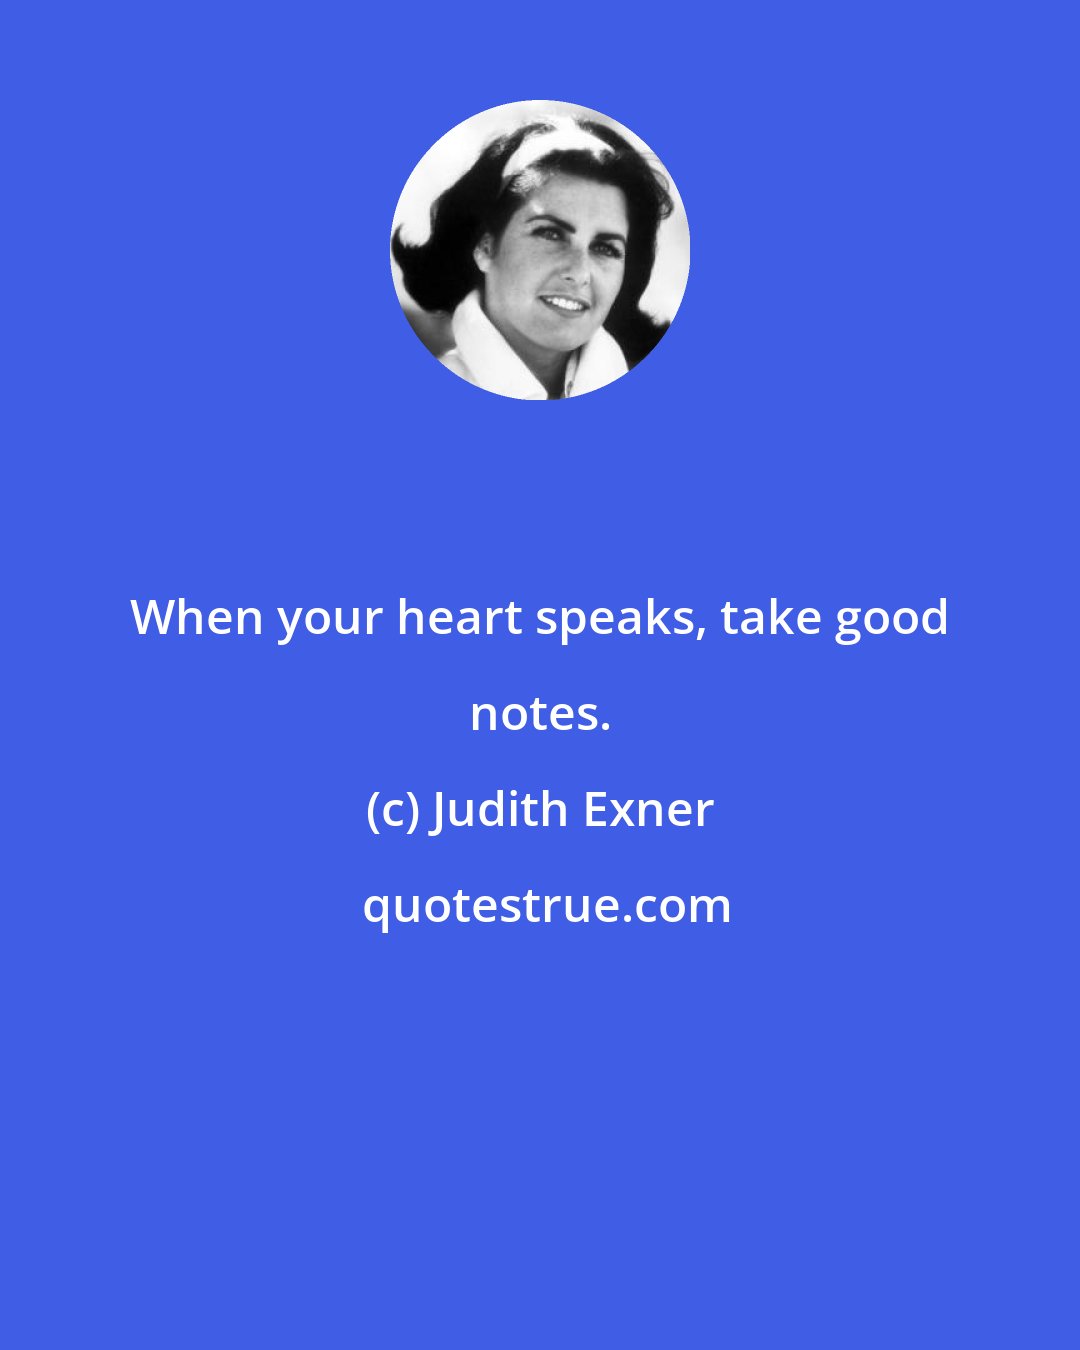 Judith Exner: When your heart speaks, take good notes.